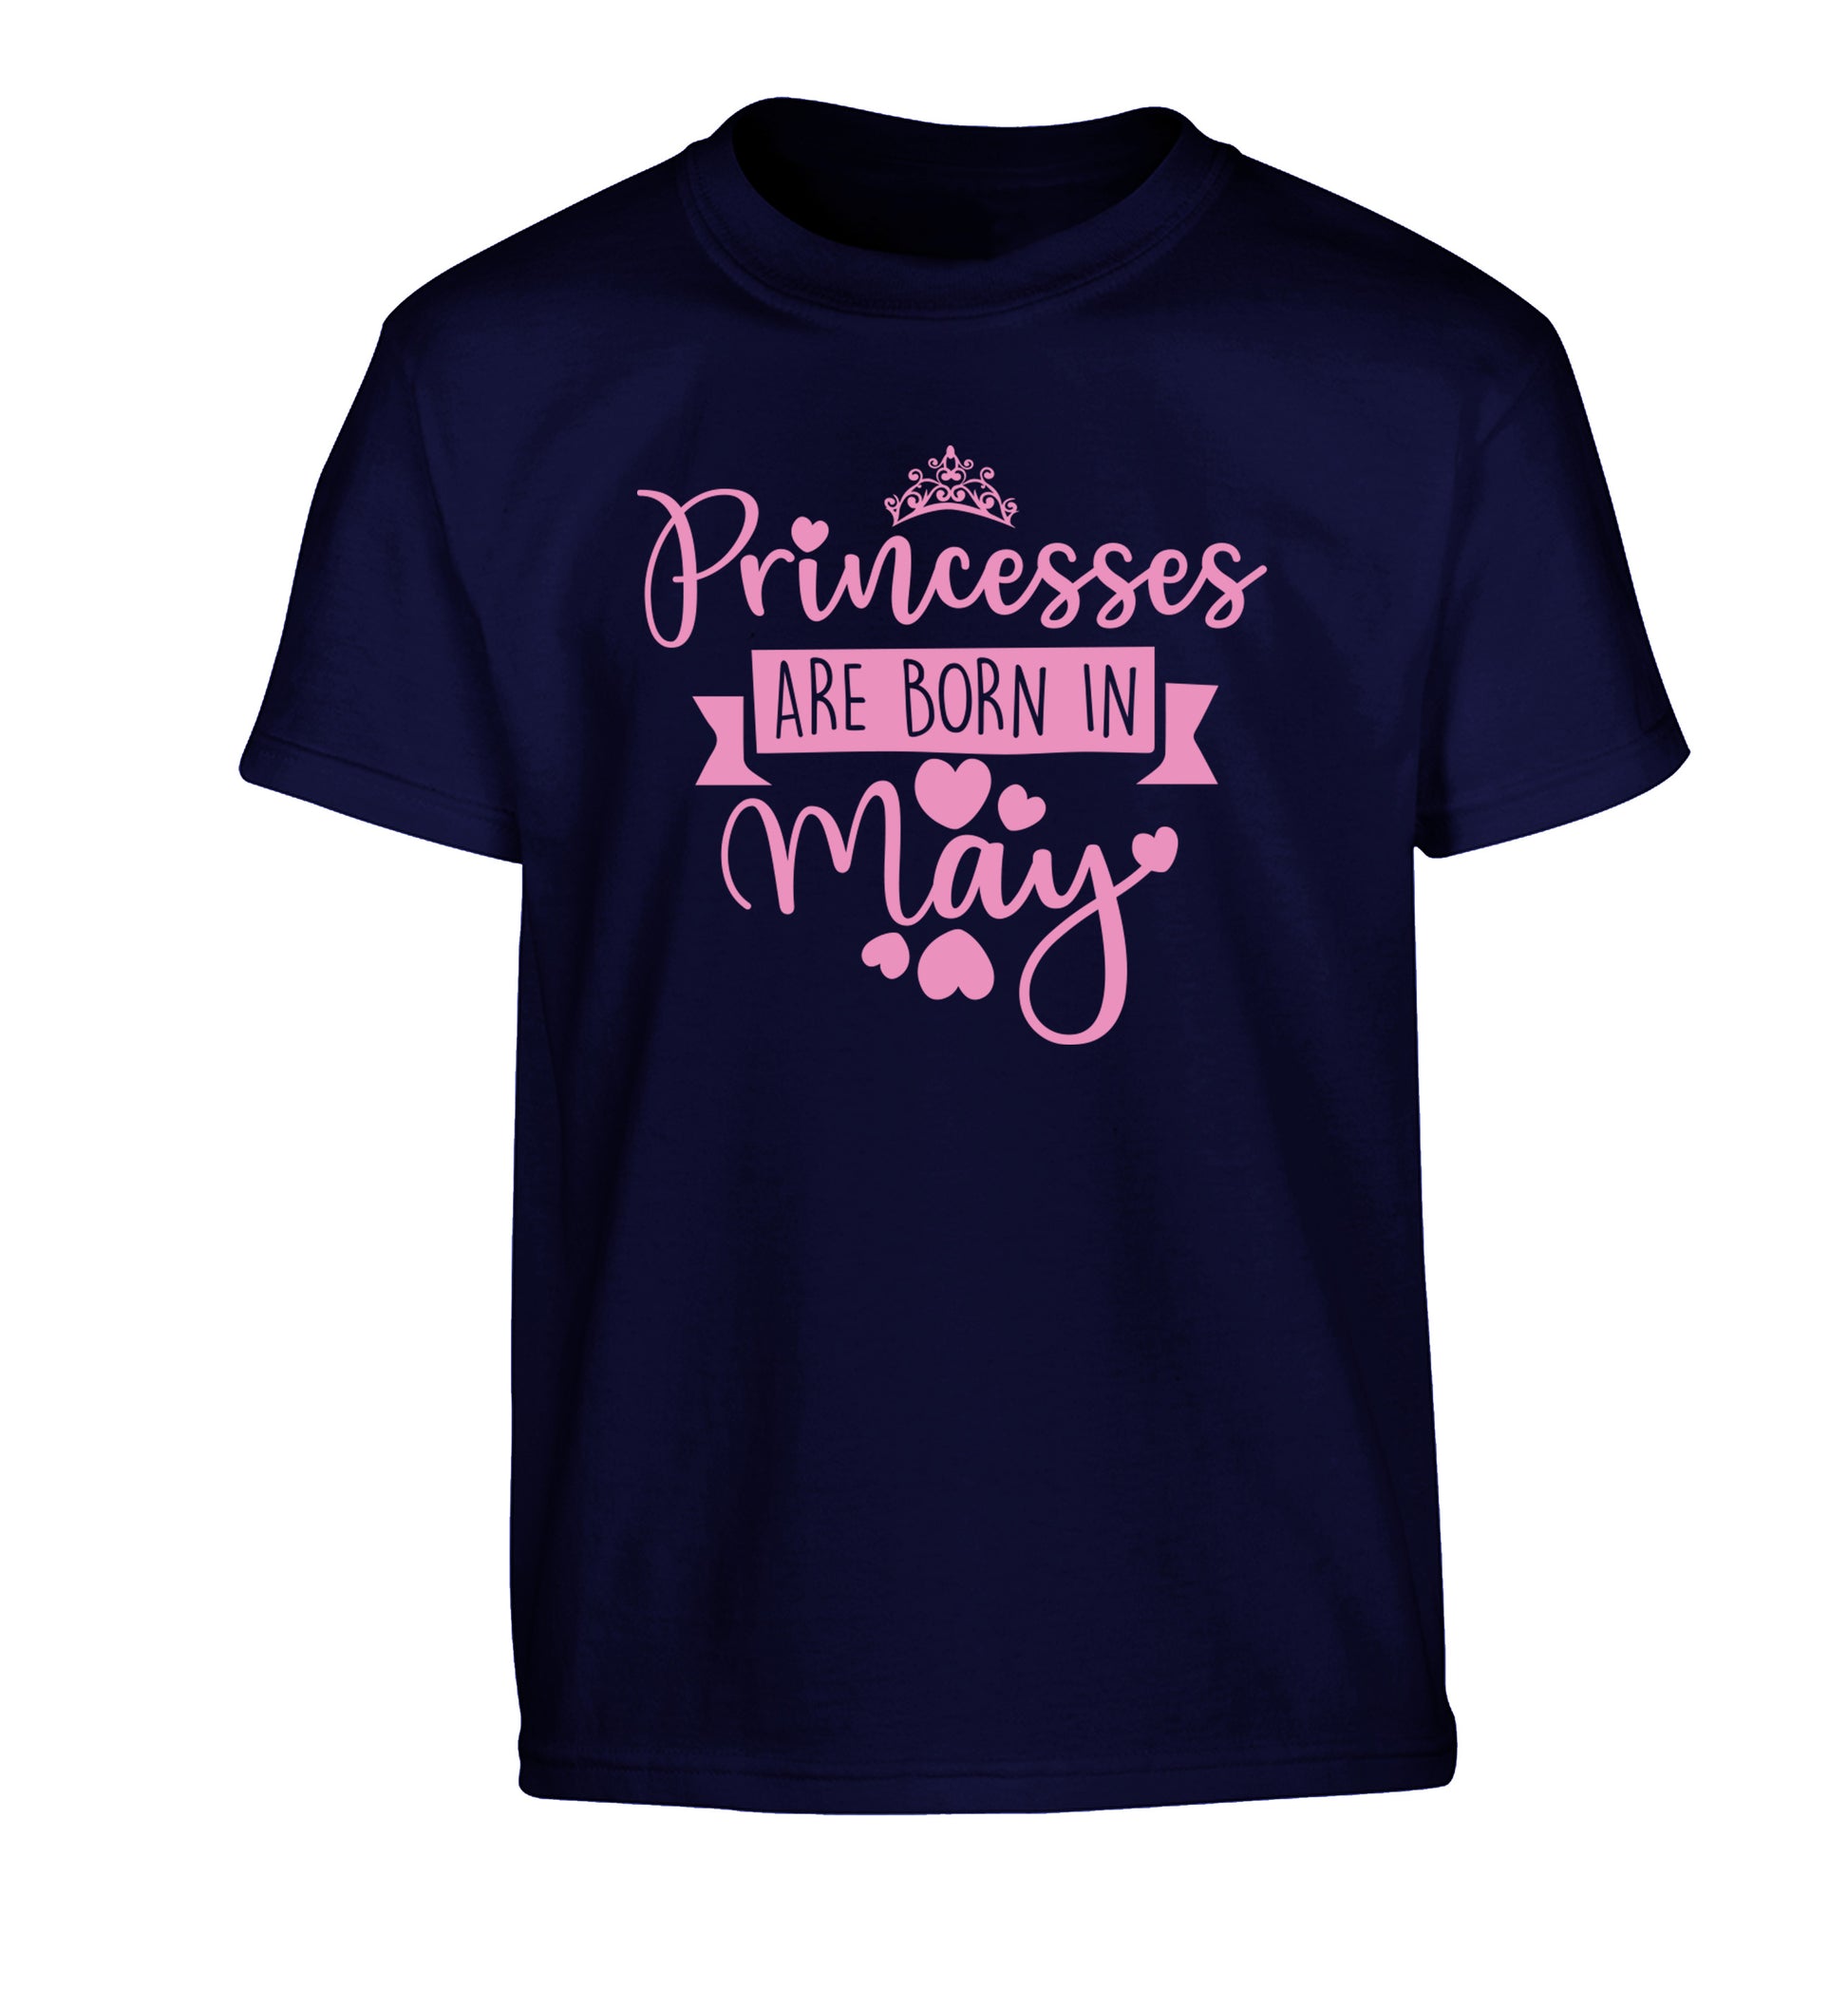 Princesses are born in May Children's navy Tshirt 12-13 Years